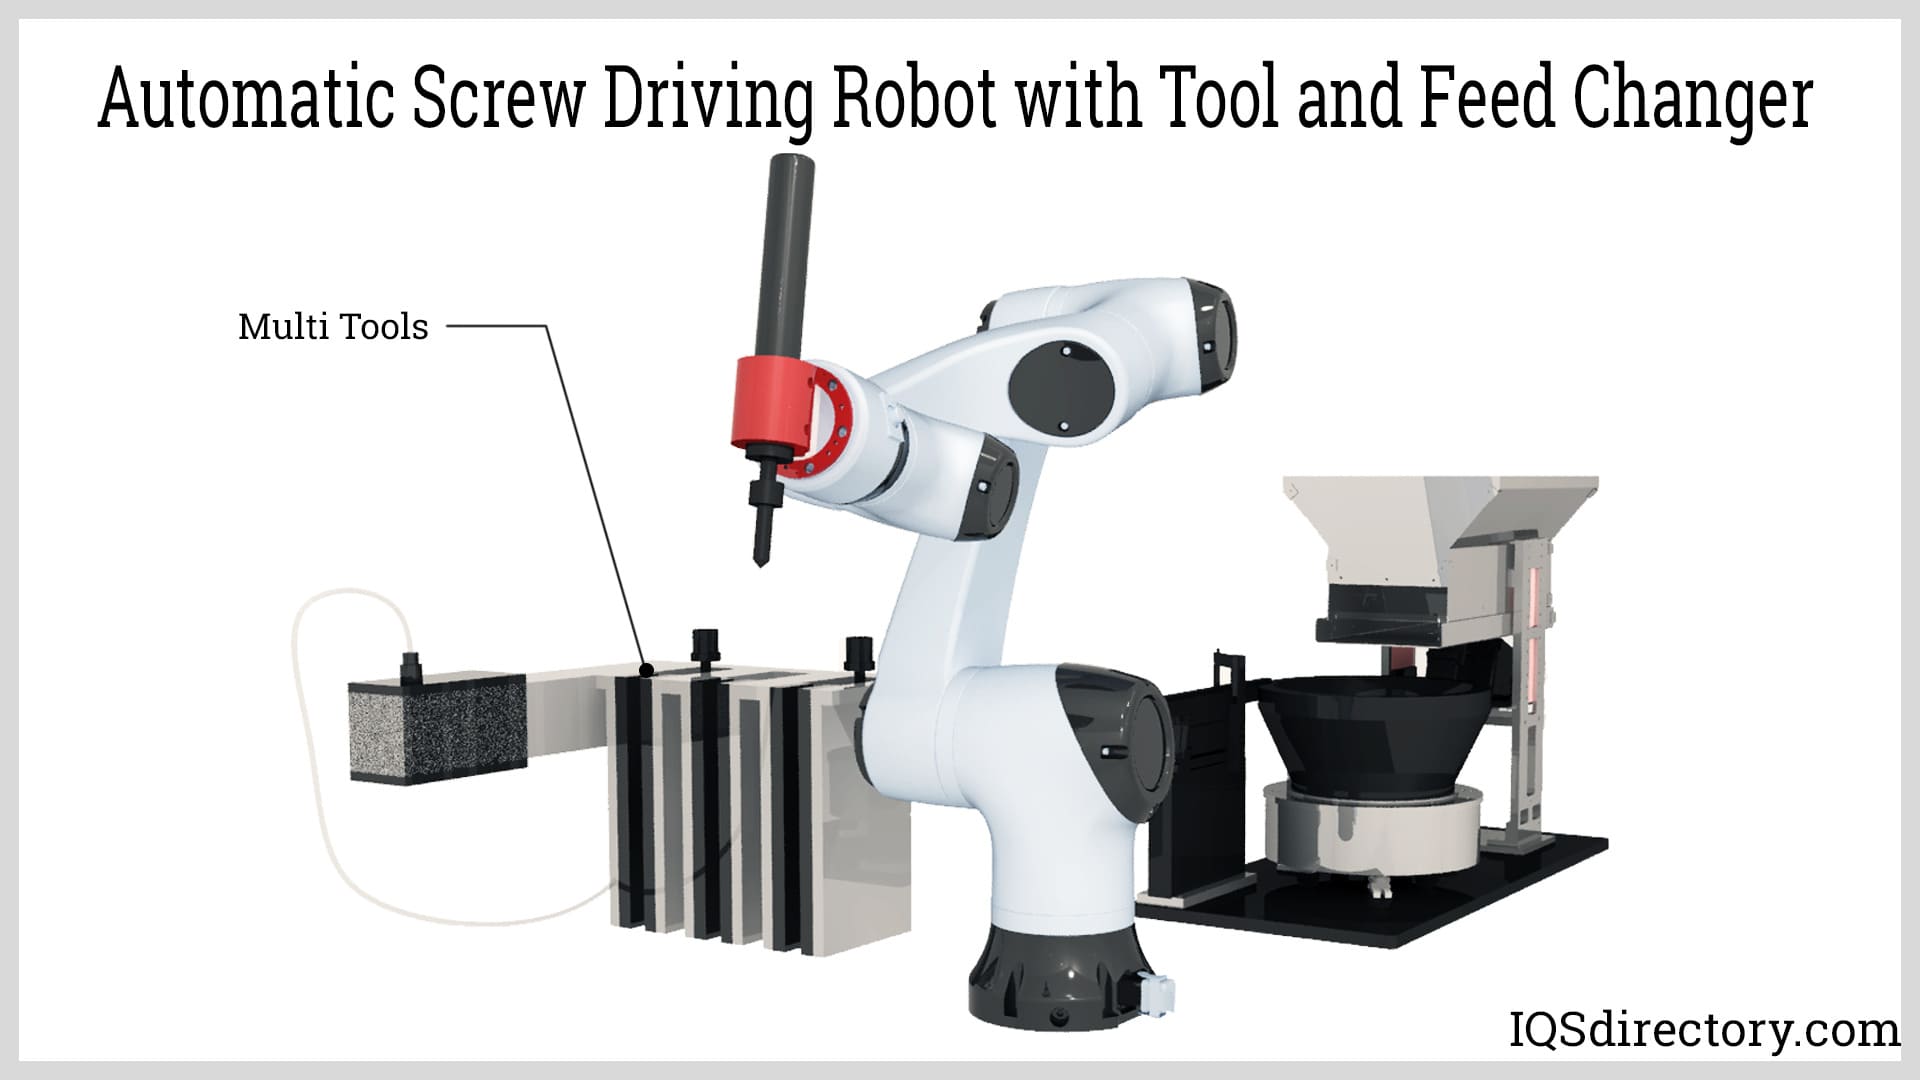 Automatic Screw Driving Robot with Tool and Feed Changer